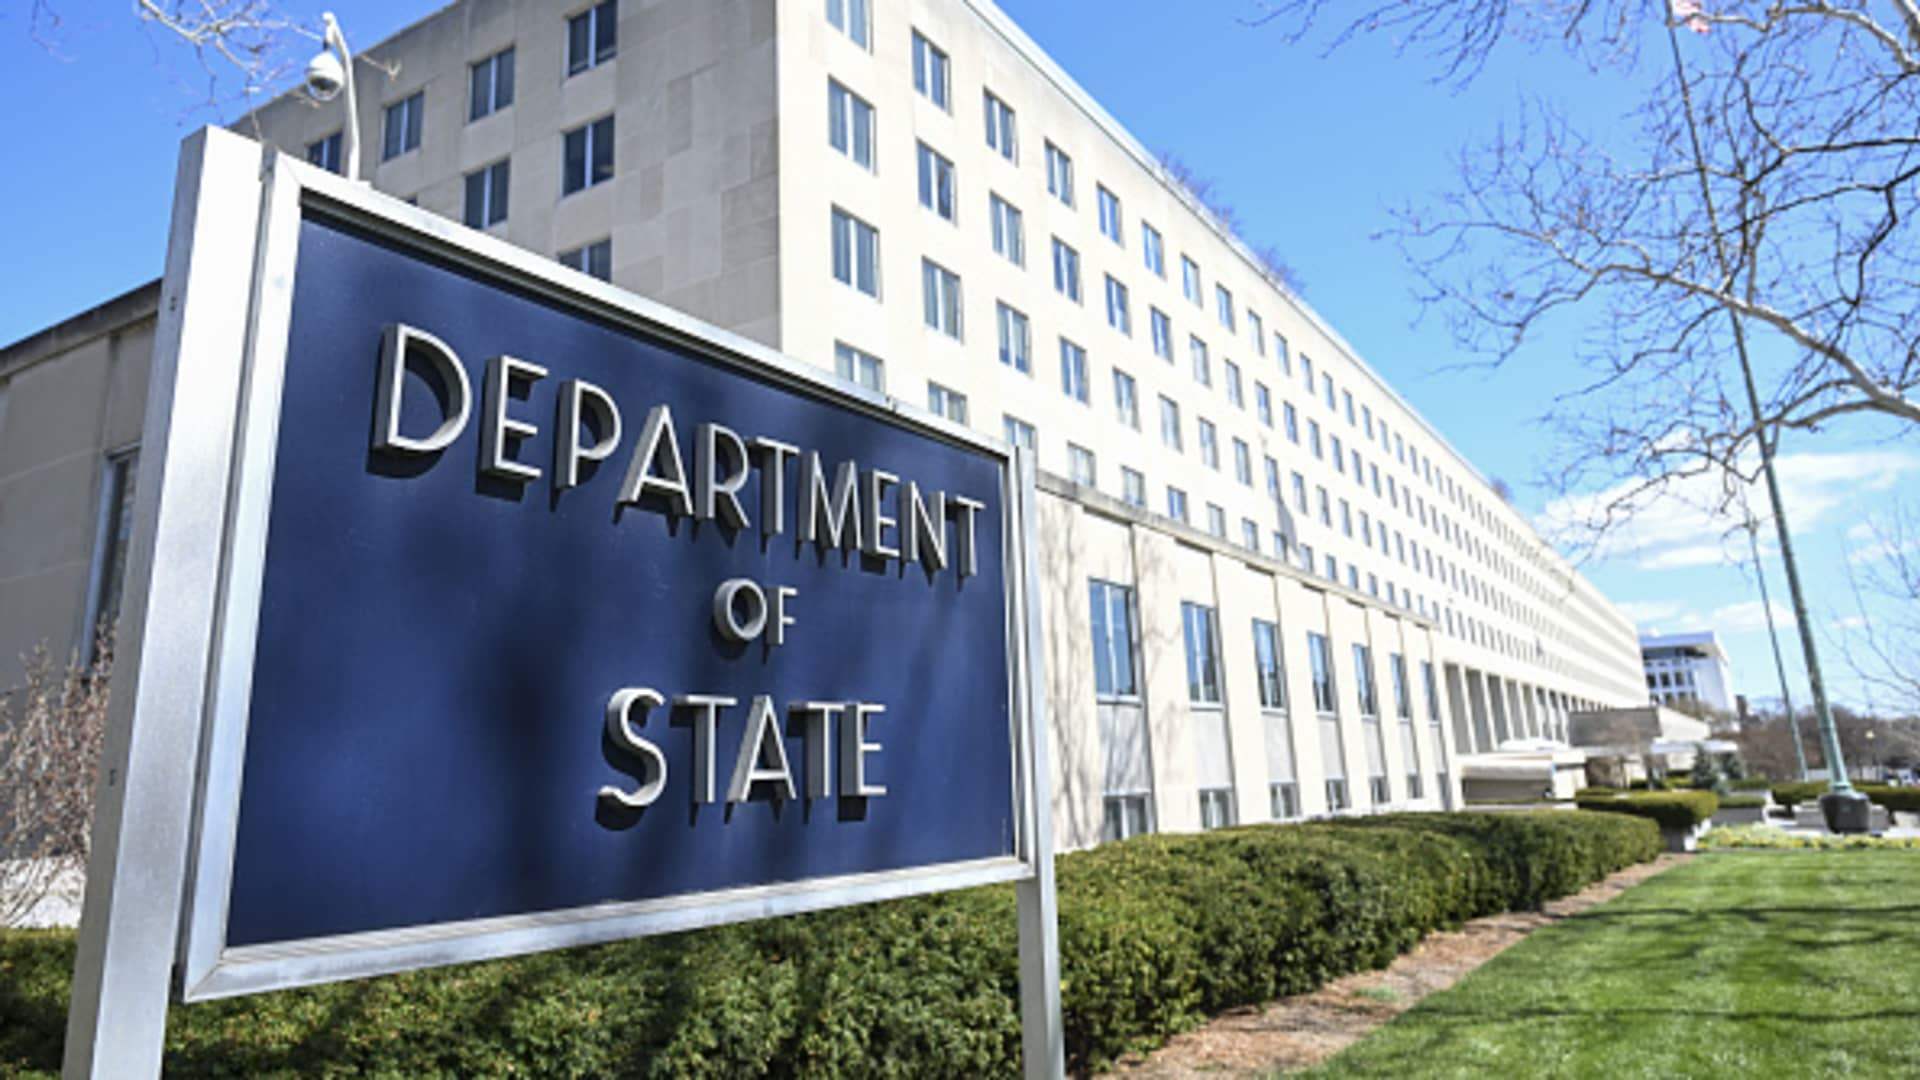 US State Department statement: Designating individuals and entities with ties to terrorist organizations